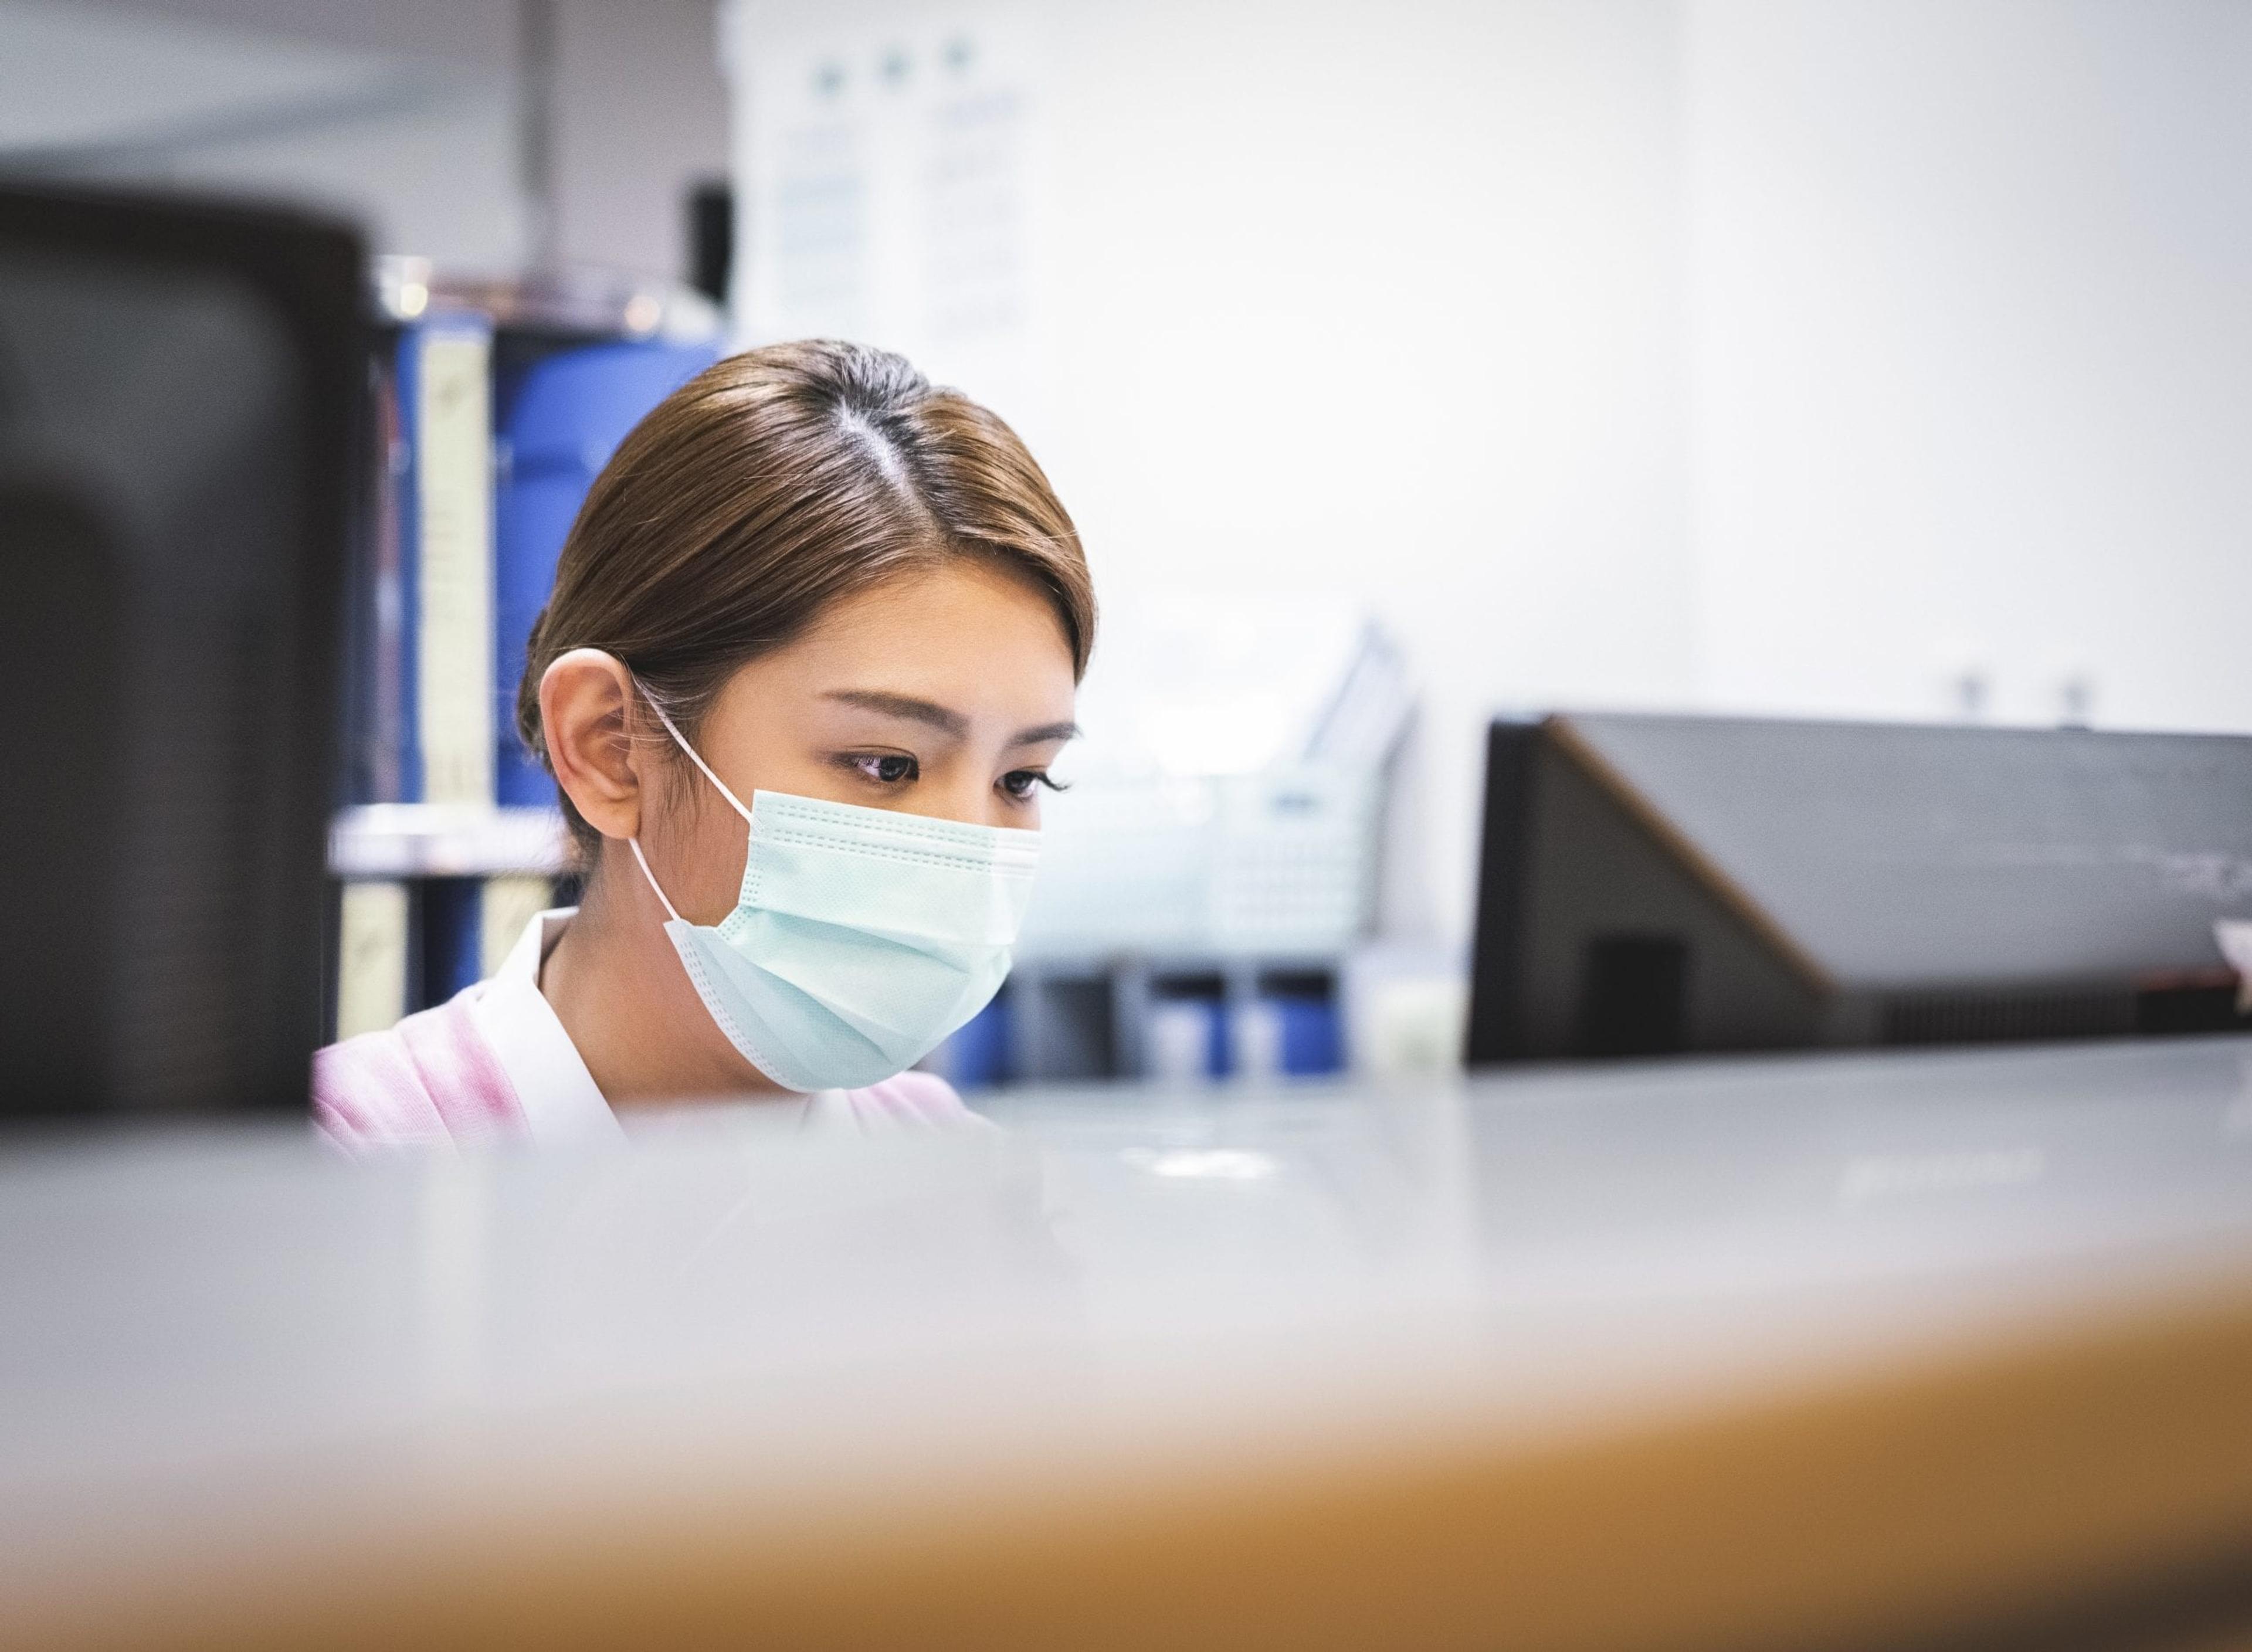 Nurse wearing a mask working on computer